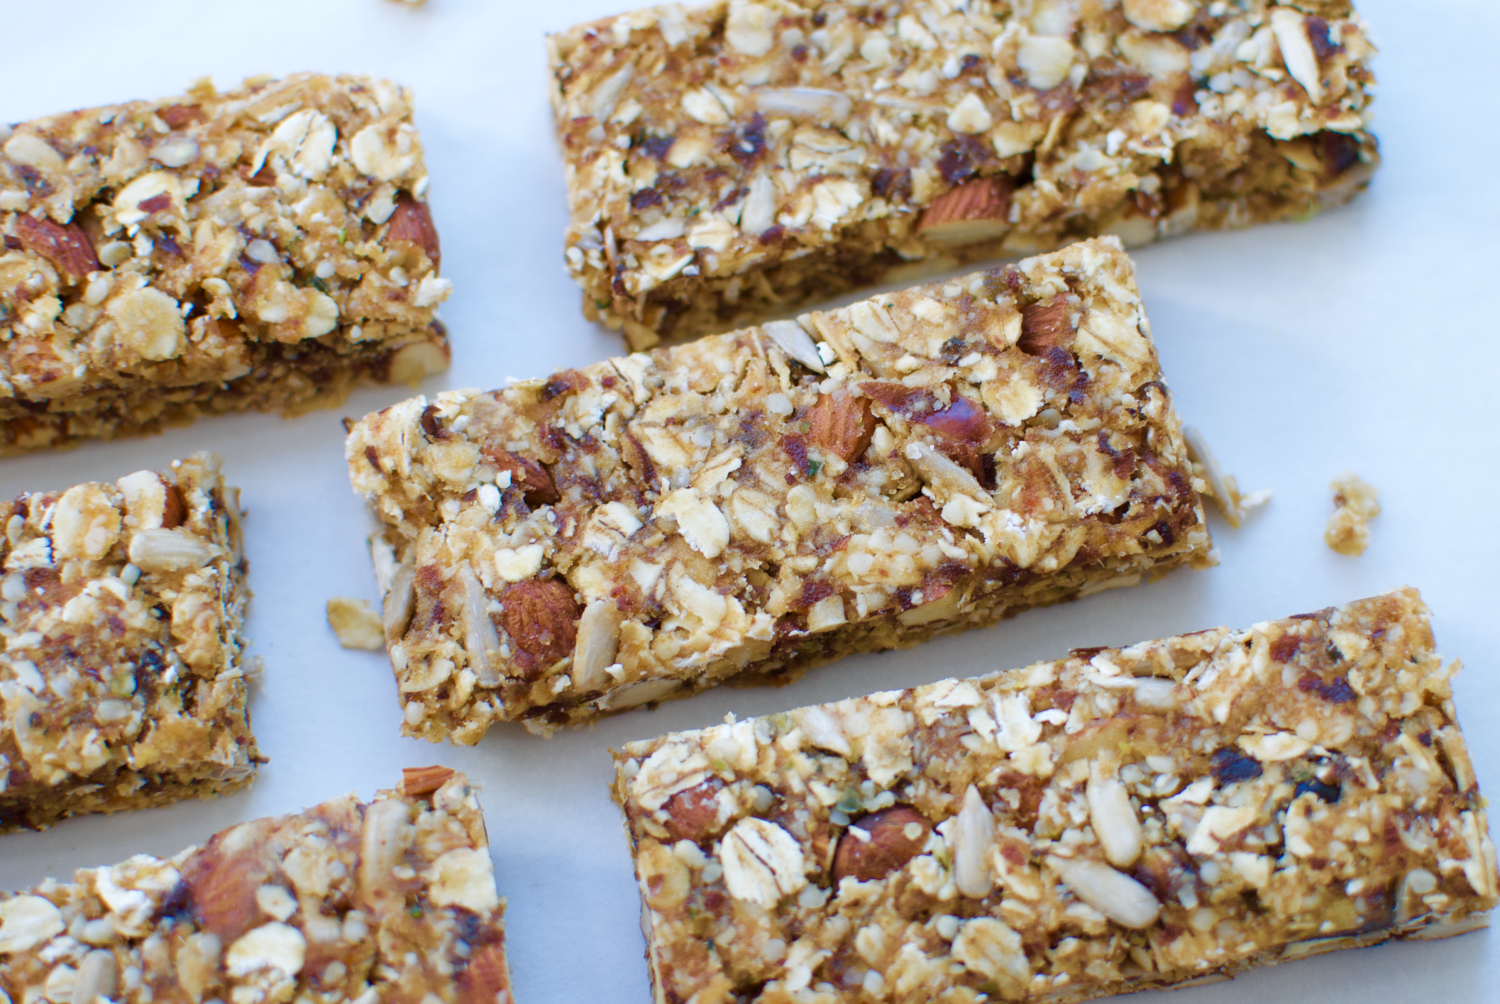 No-bake granola bars with dates and peanut butter